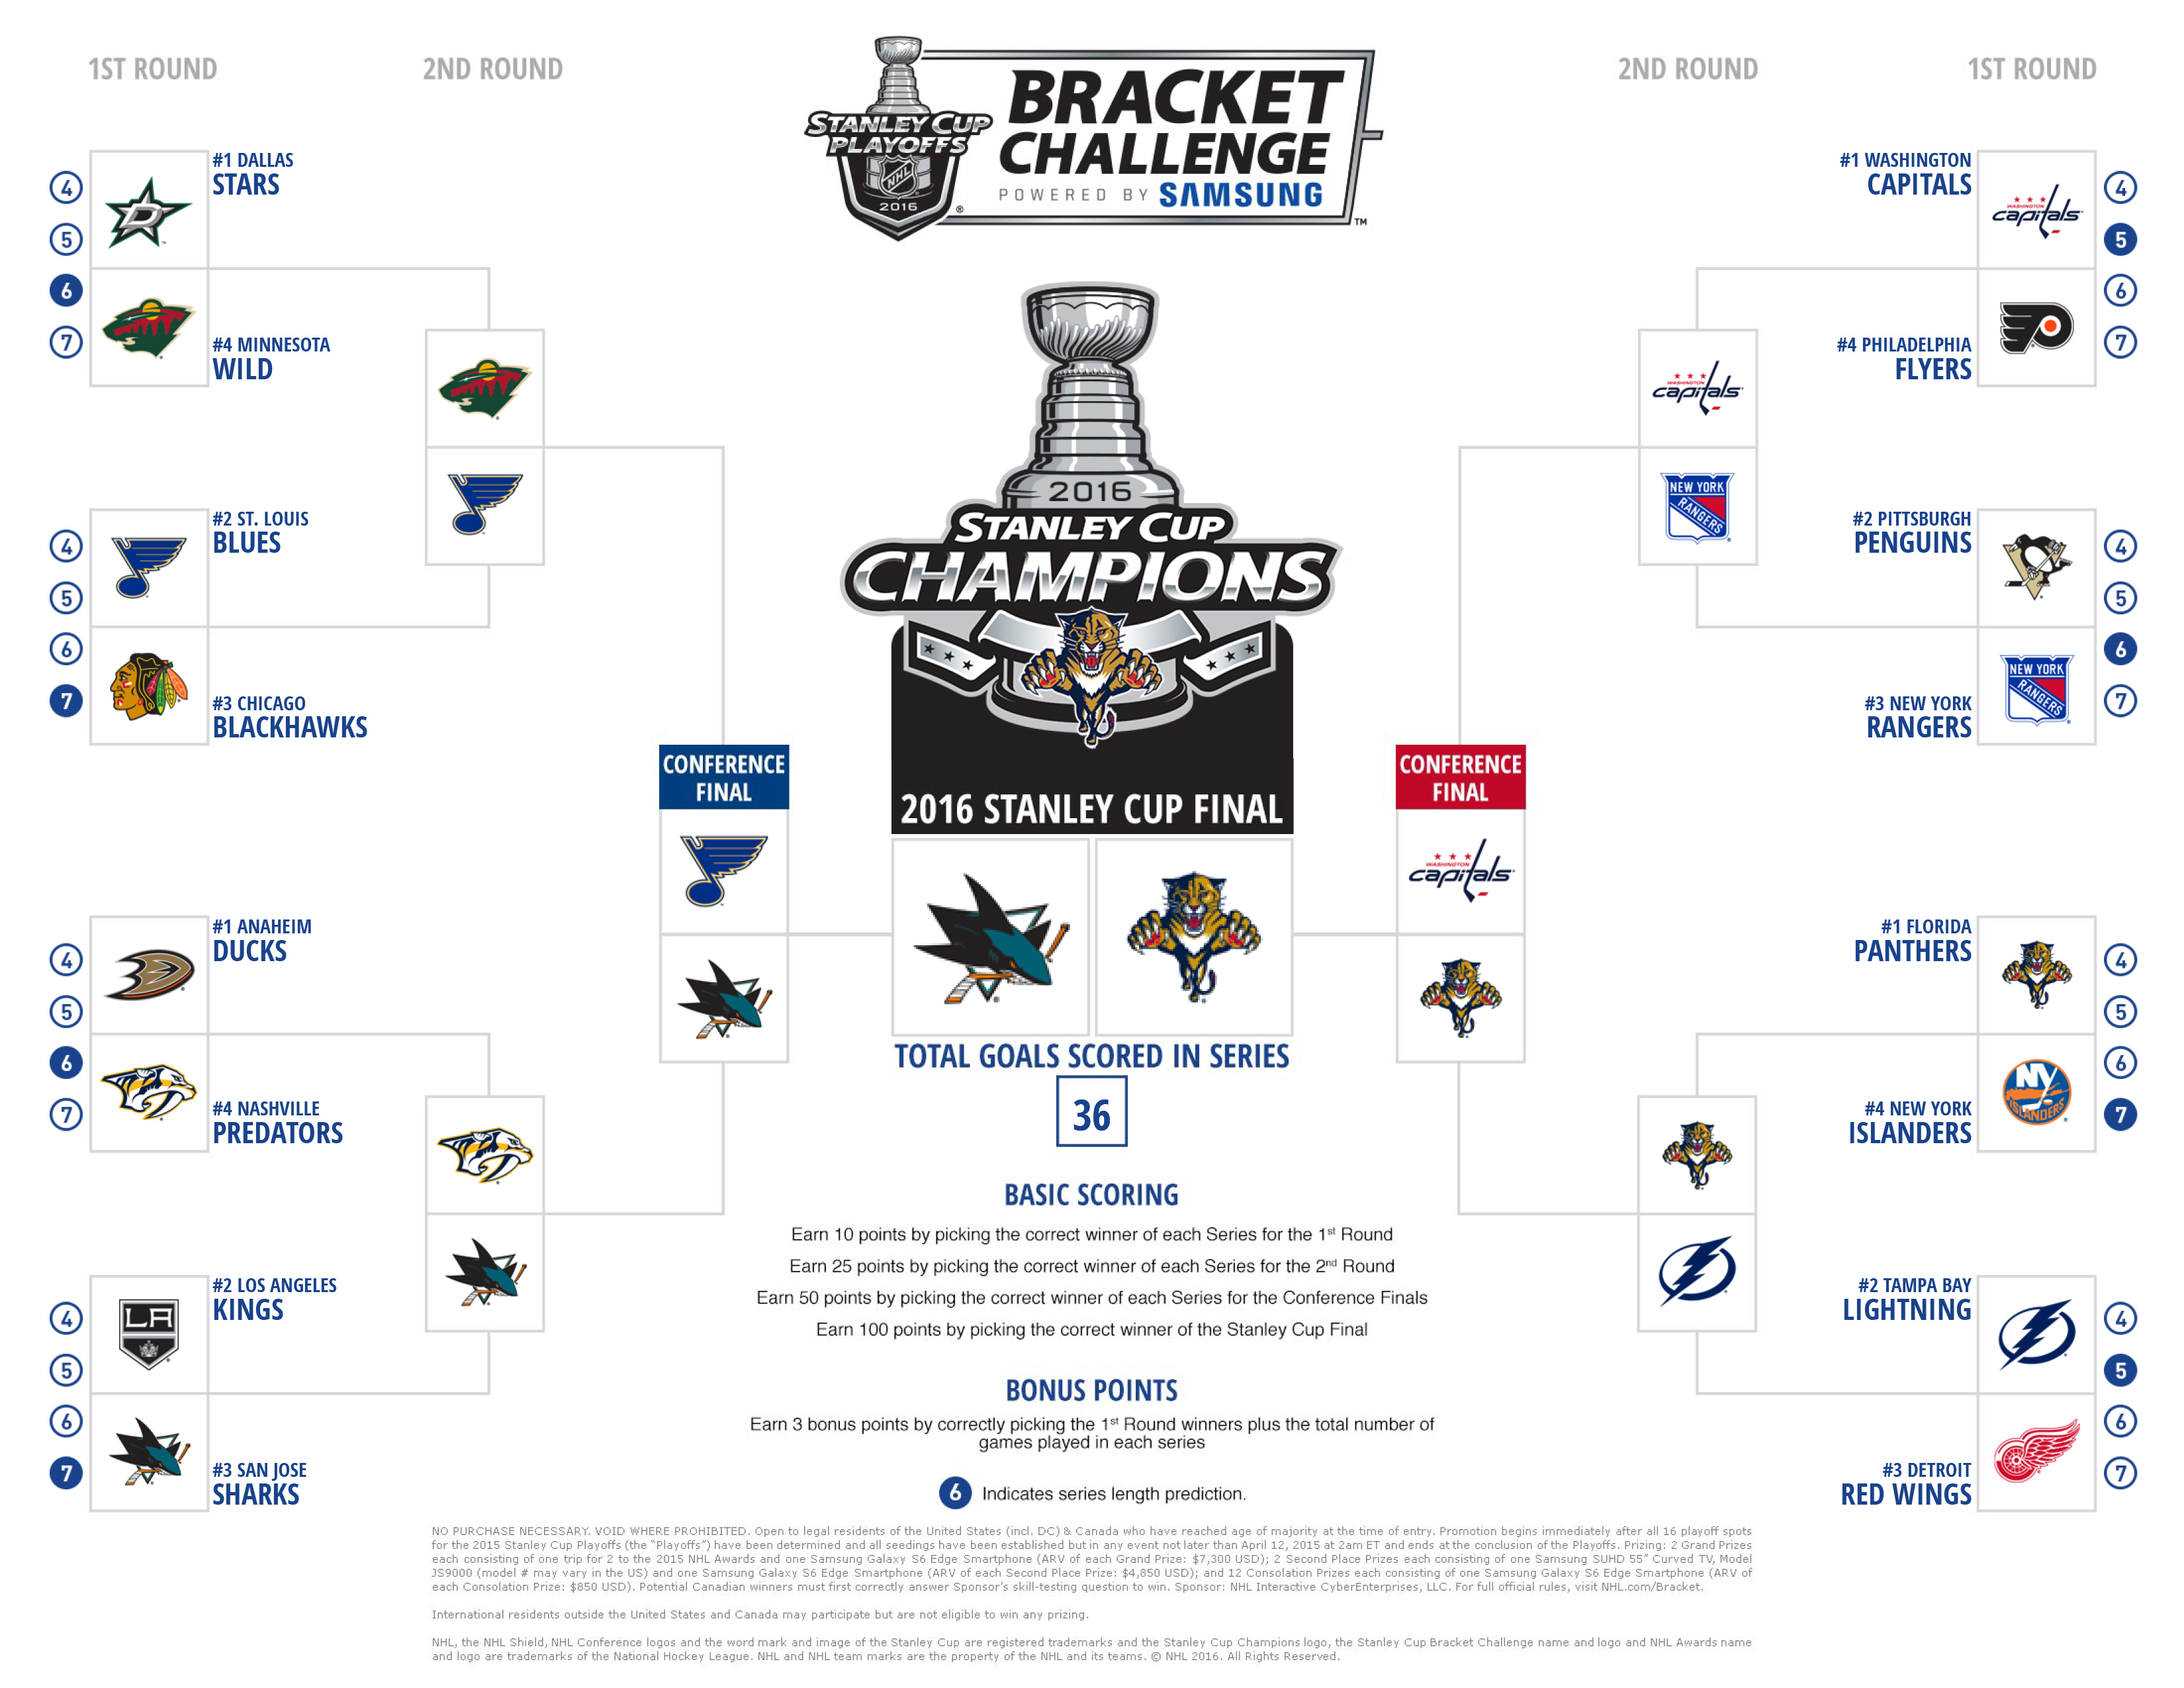 2016 Stanley Cup Brackets: How'd I Do 